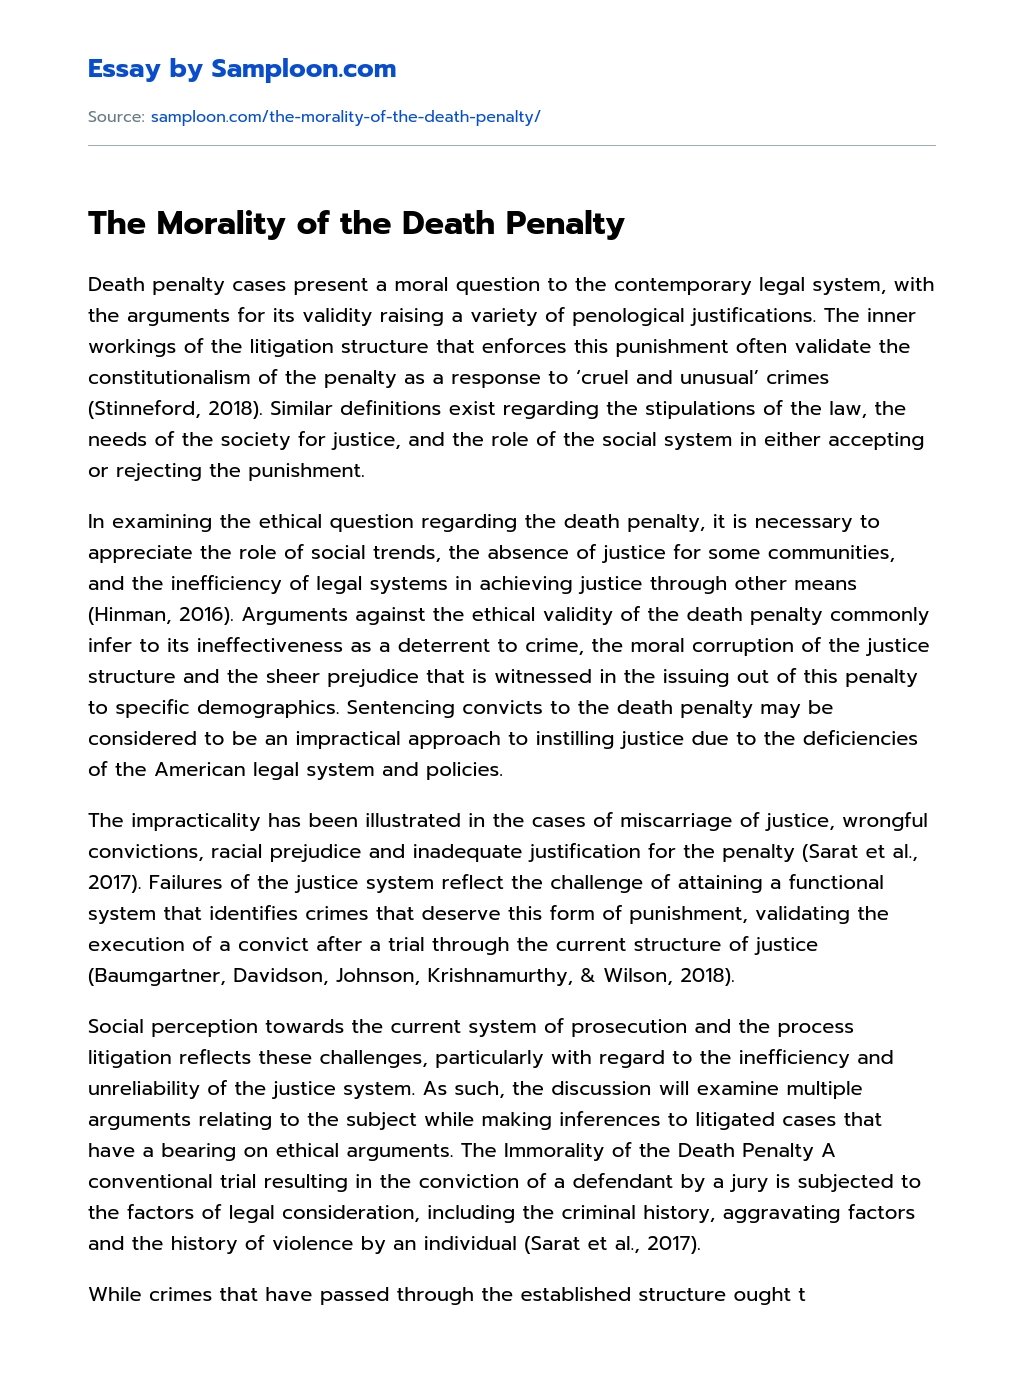 The Morality of the Death Penalty essay